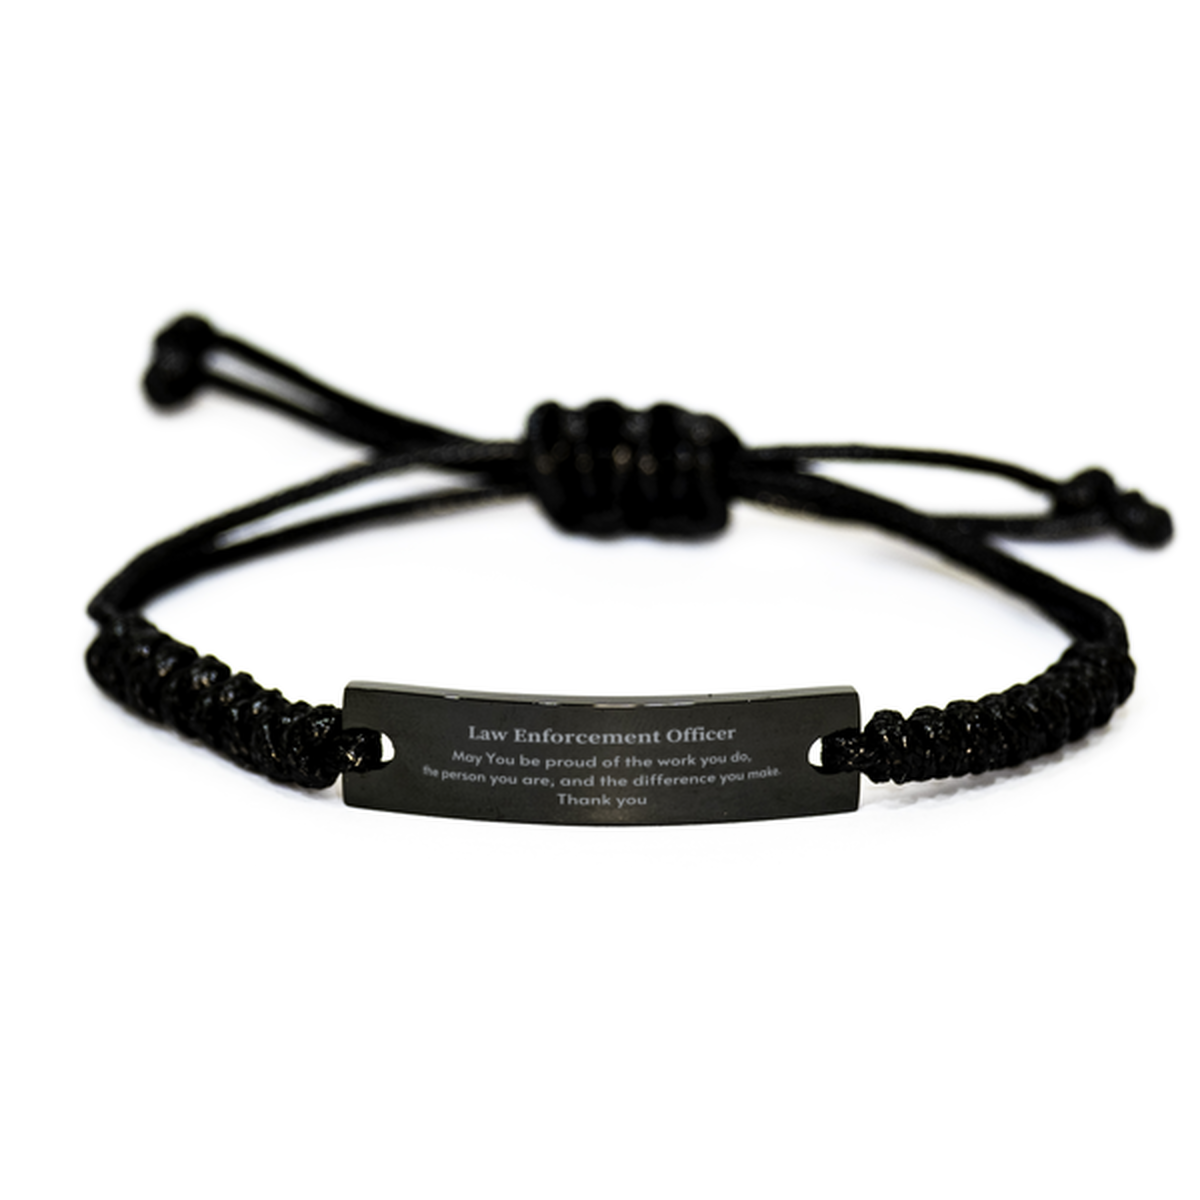 Heartwarming Black Rope Bracelet Retirement Coworkers Gifts for Law Enforcement Officer, Law Enforcement Officer May You be proud of the work you do, the person you are Gifts for Boss Men Women Friends